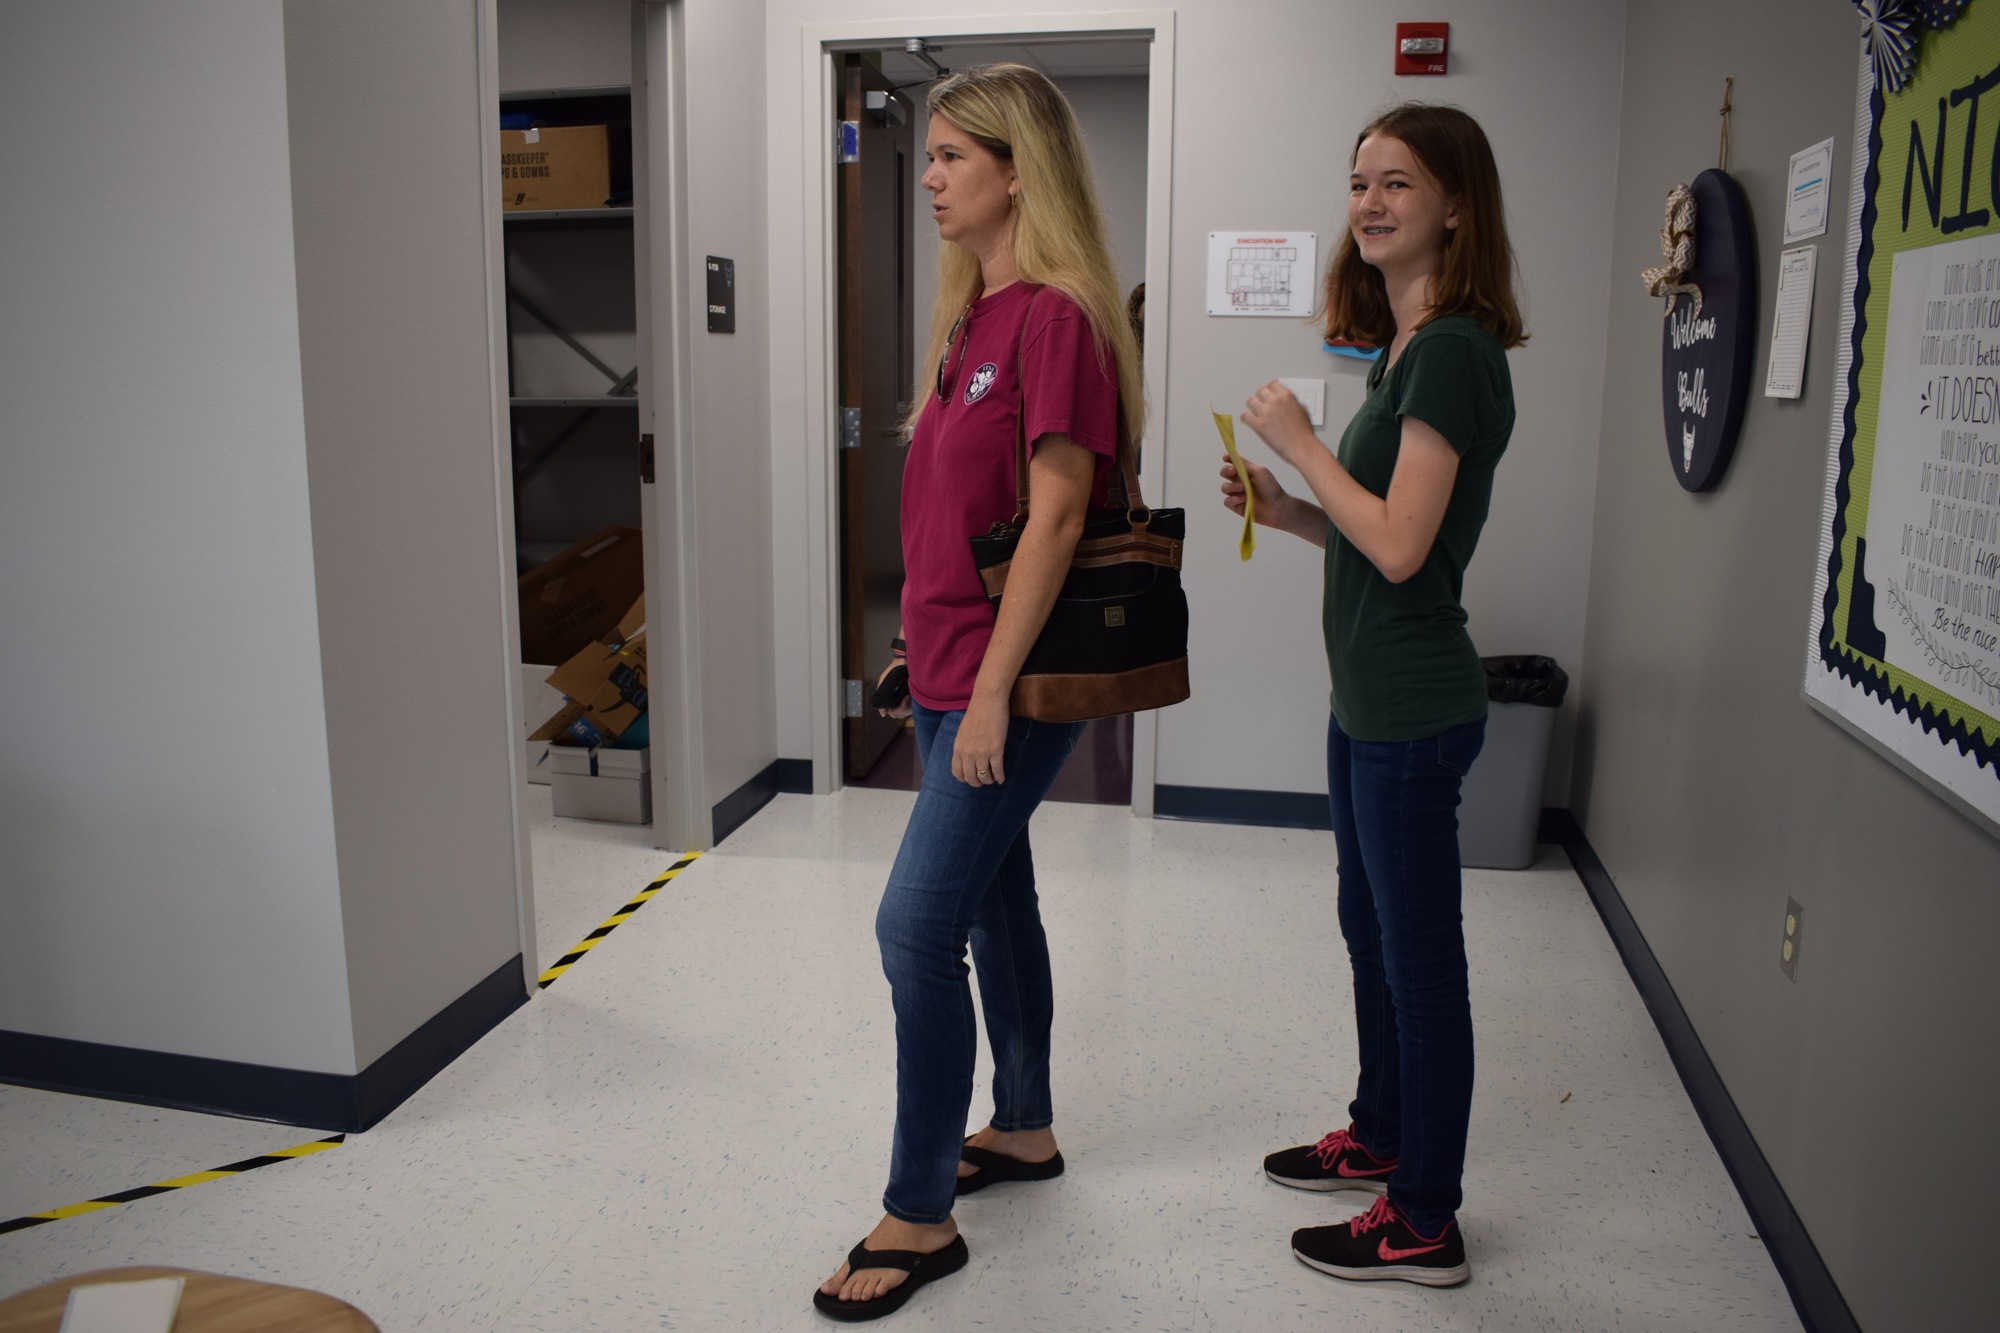 Shelly Goforth, left, and her daughter Emily, 13, view a math classroom at Parrish Community High School while touring the campus Tuesday evening. Emily Goforth will be a freshman at the school.